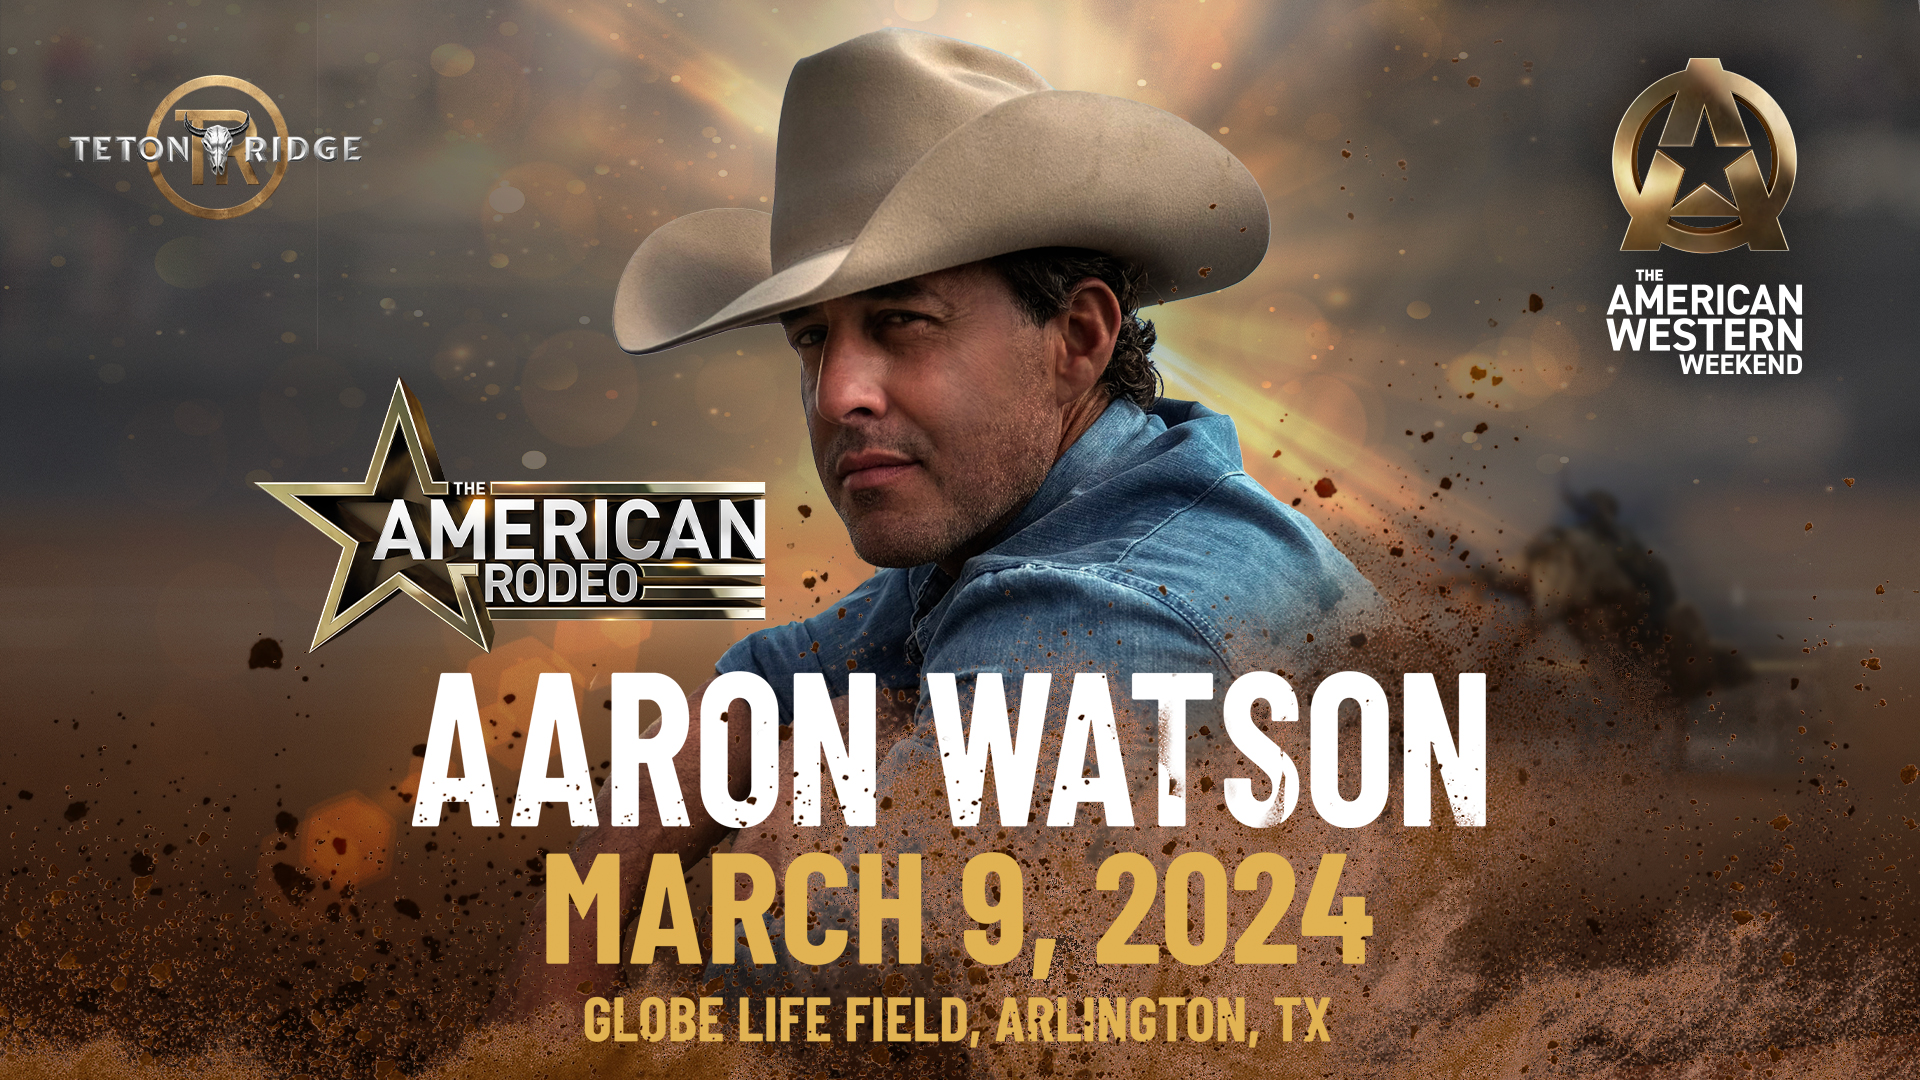 Country Music Legend Aaron Watson Announces Performance and role as